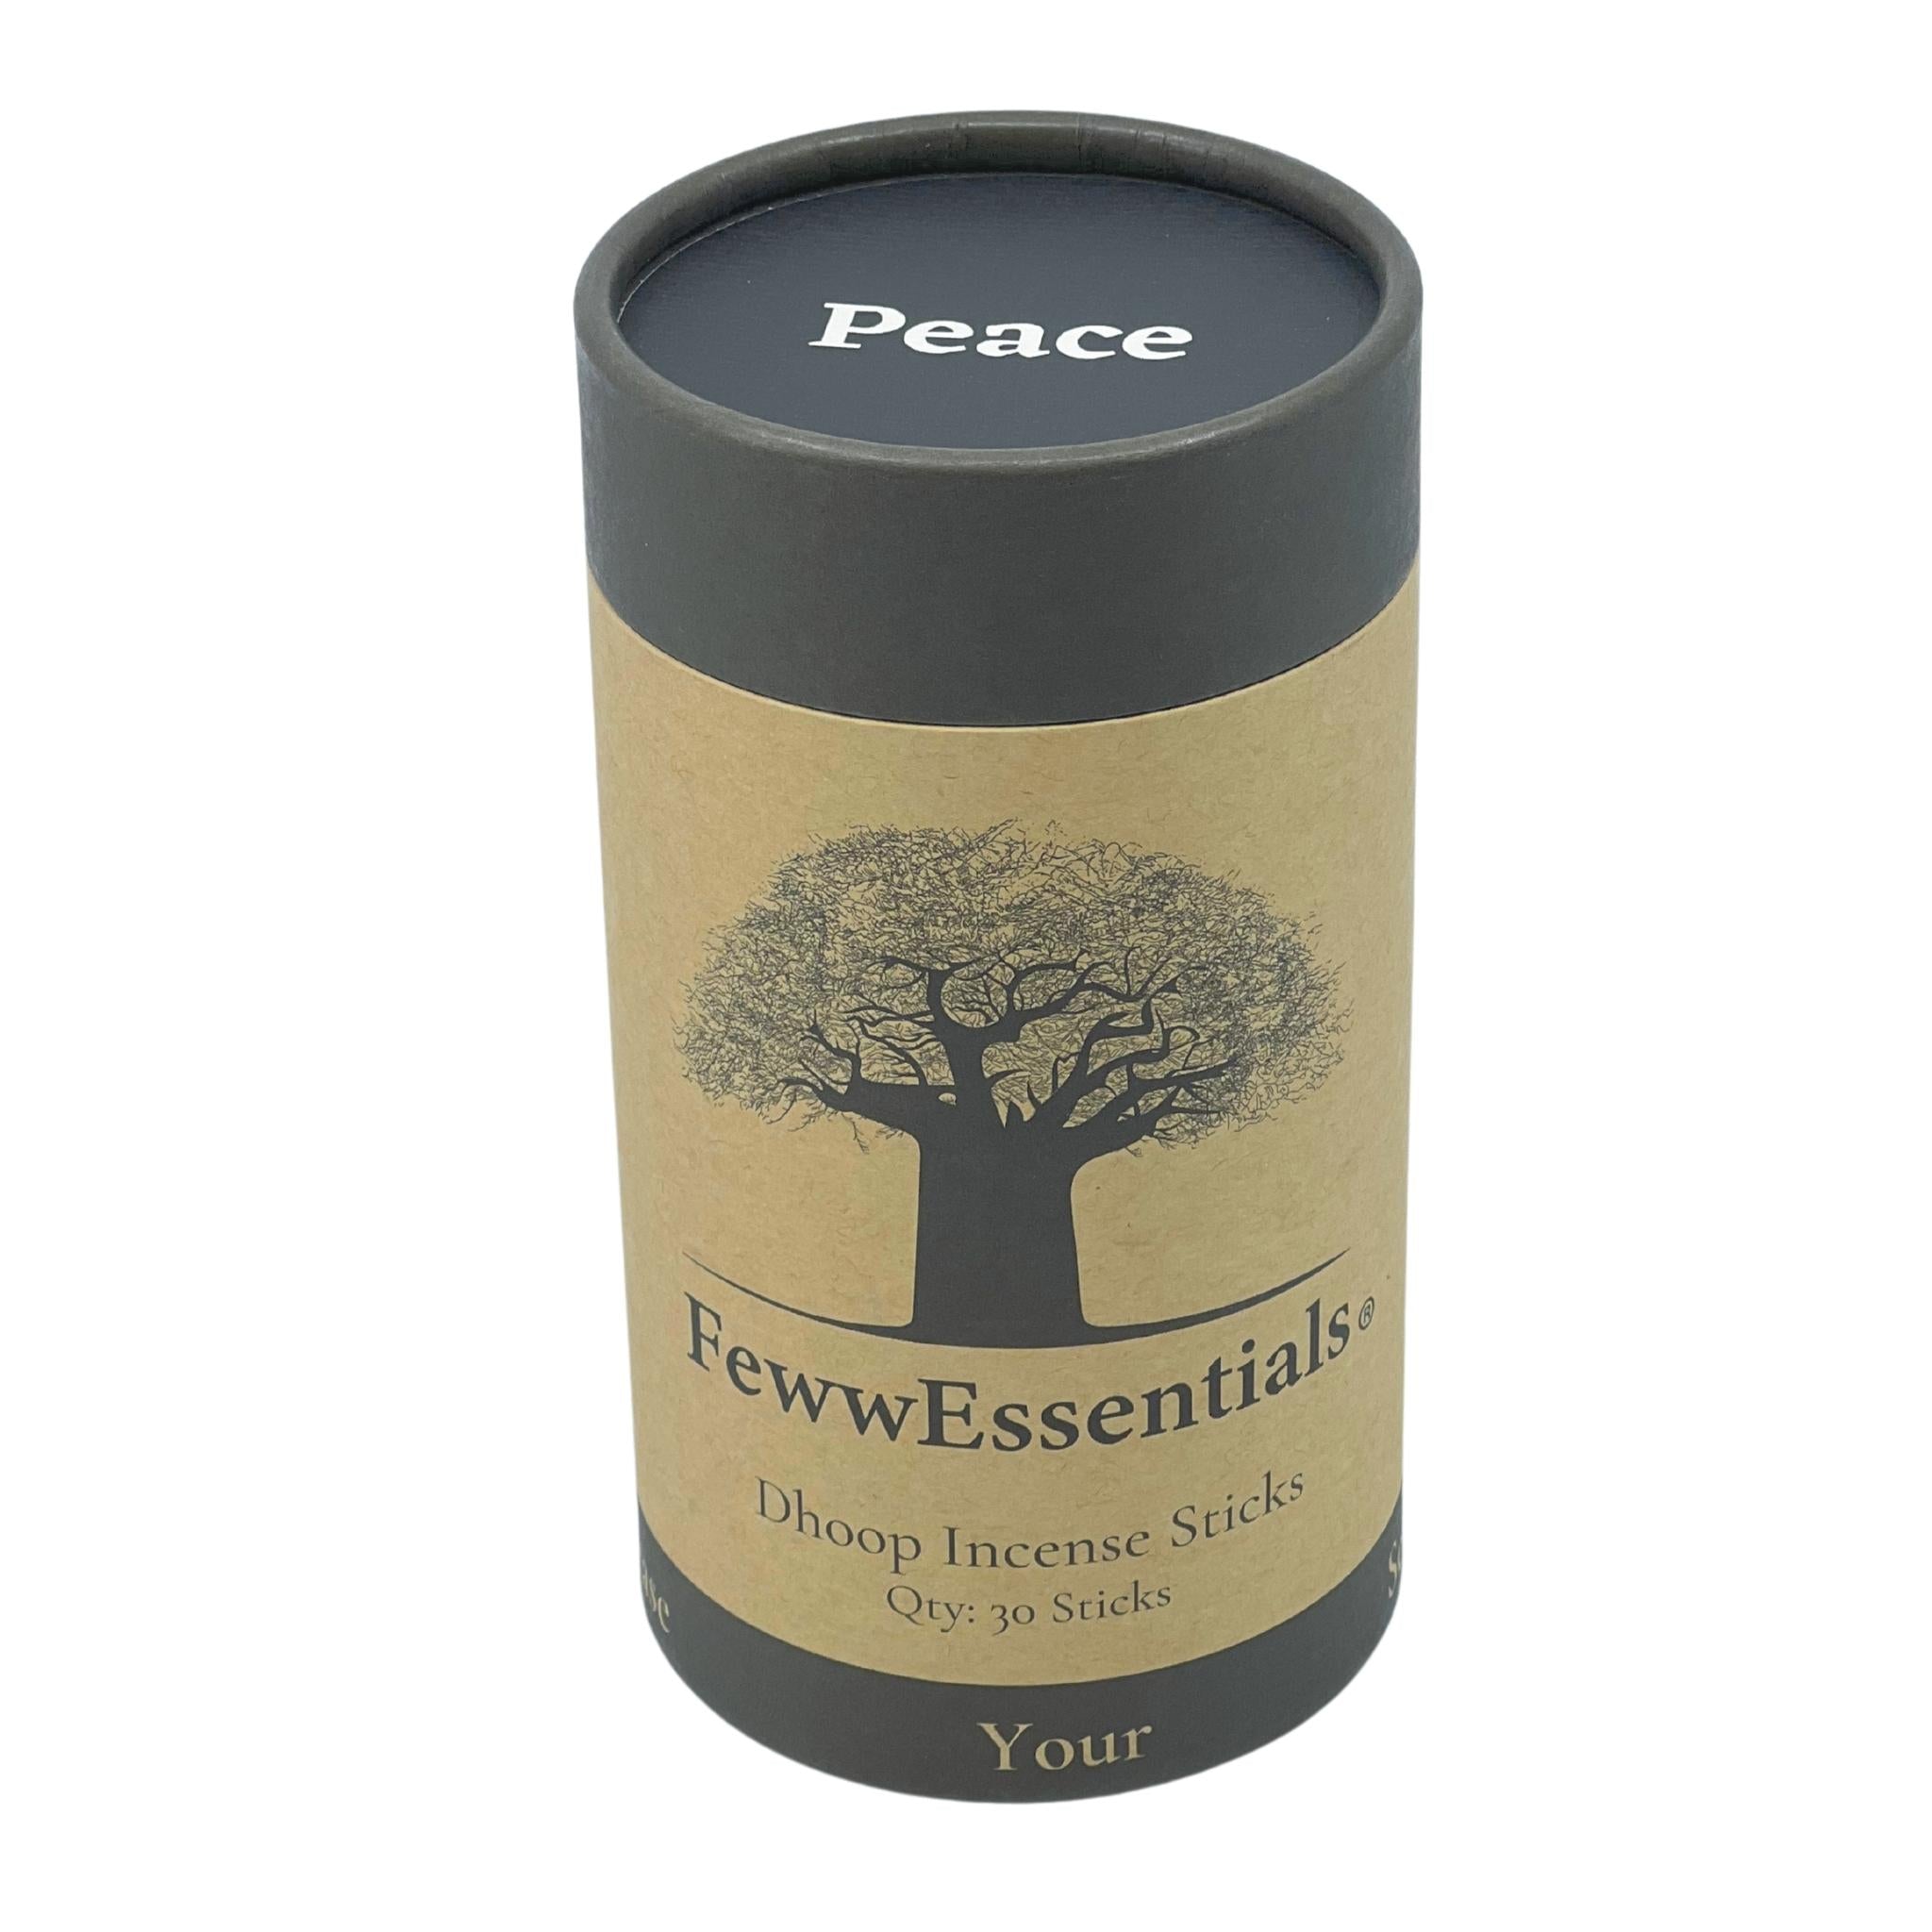 Image of FewwEssentials Dhoop Incense Sticks with the scent name Peace in a Circular Kraft Brown Box with Black Lid